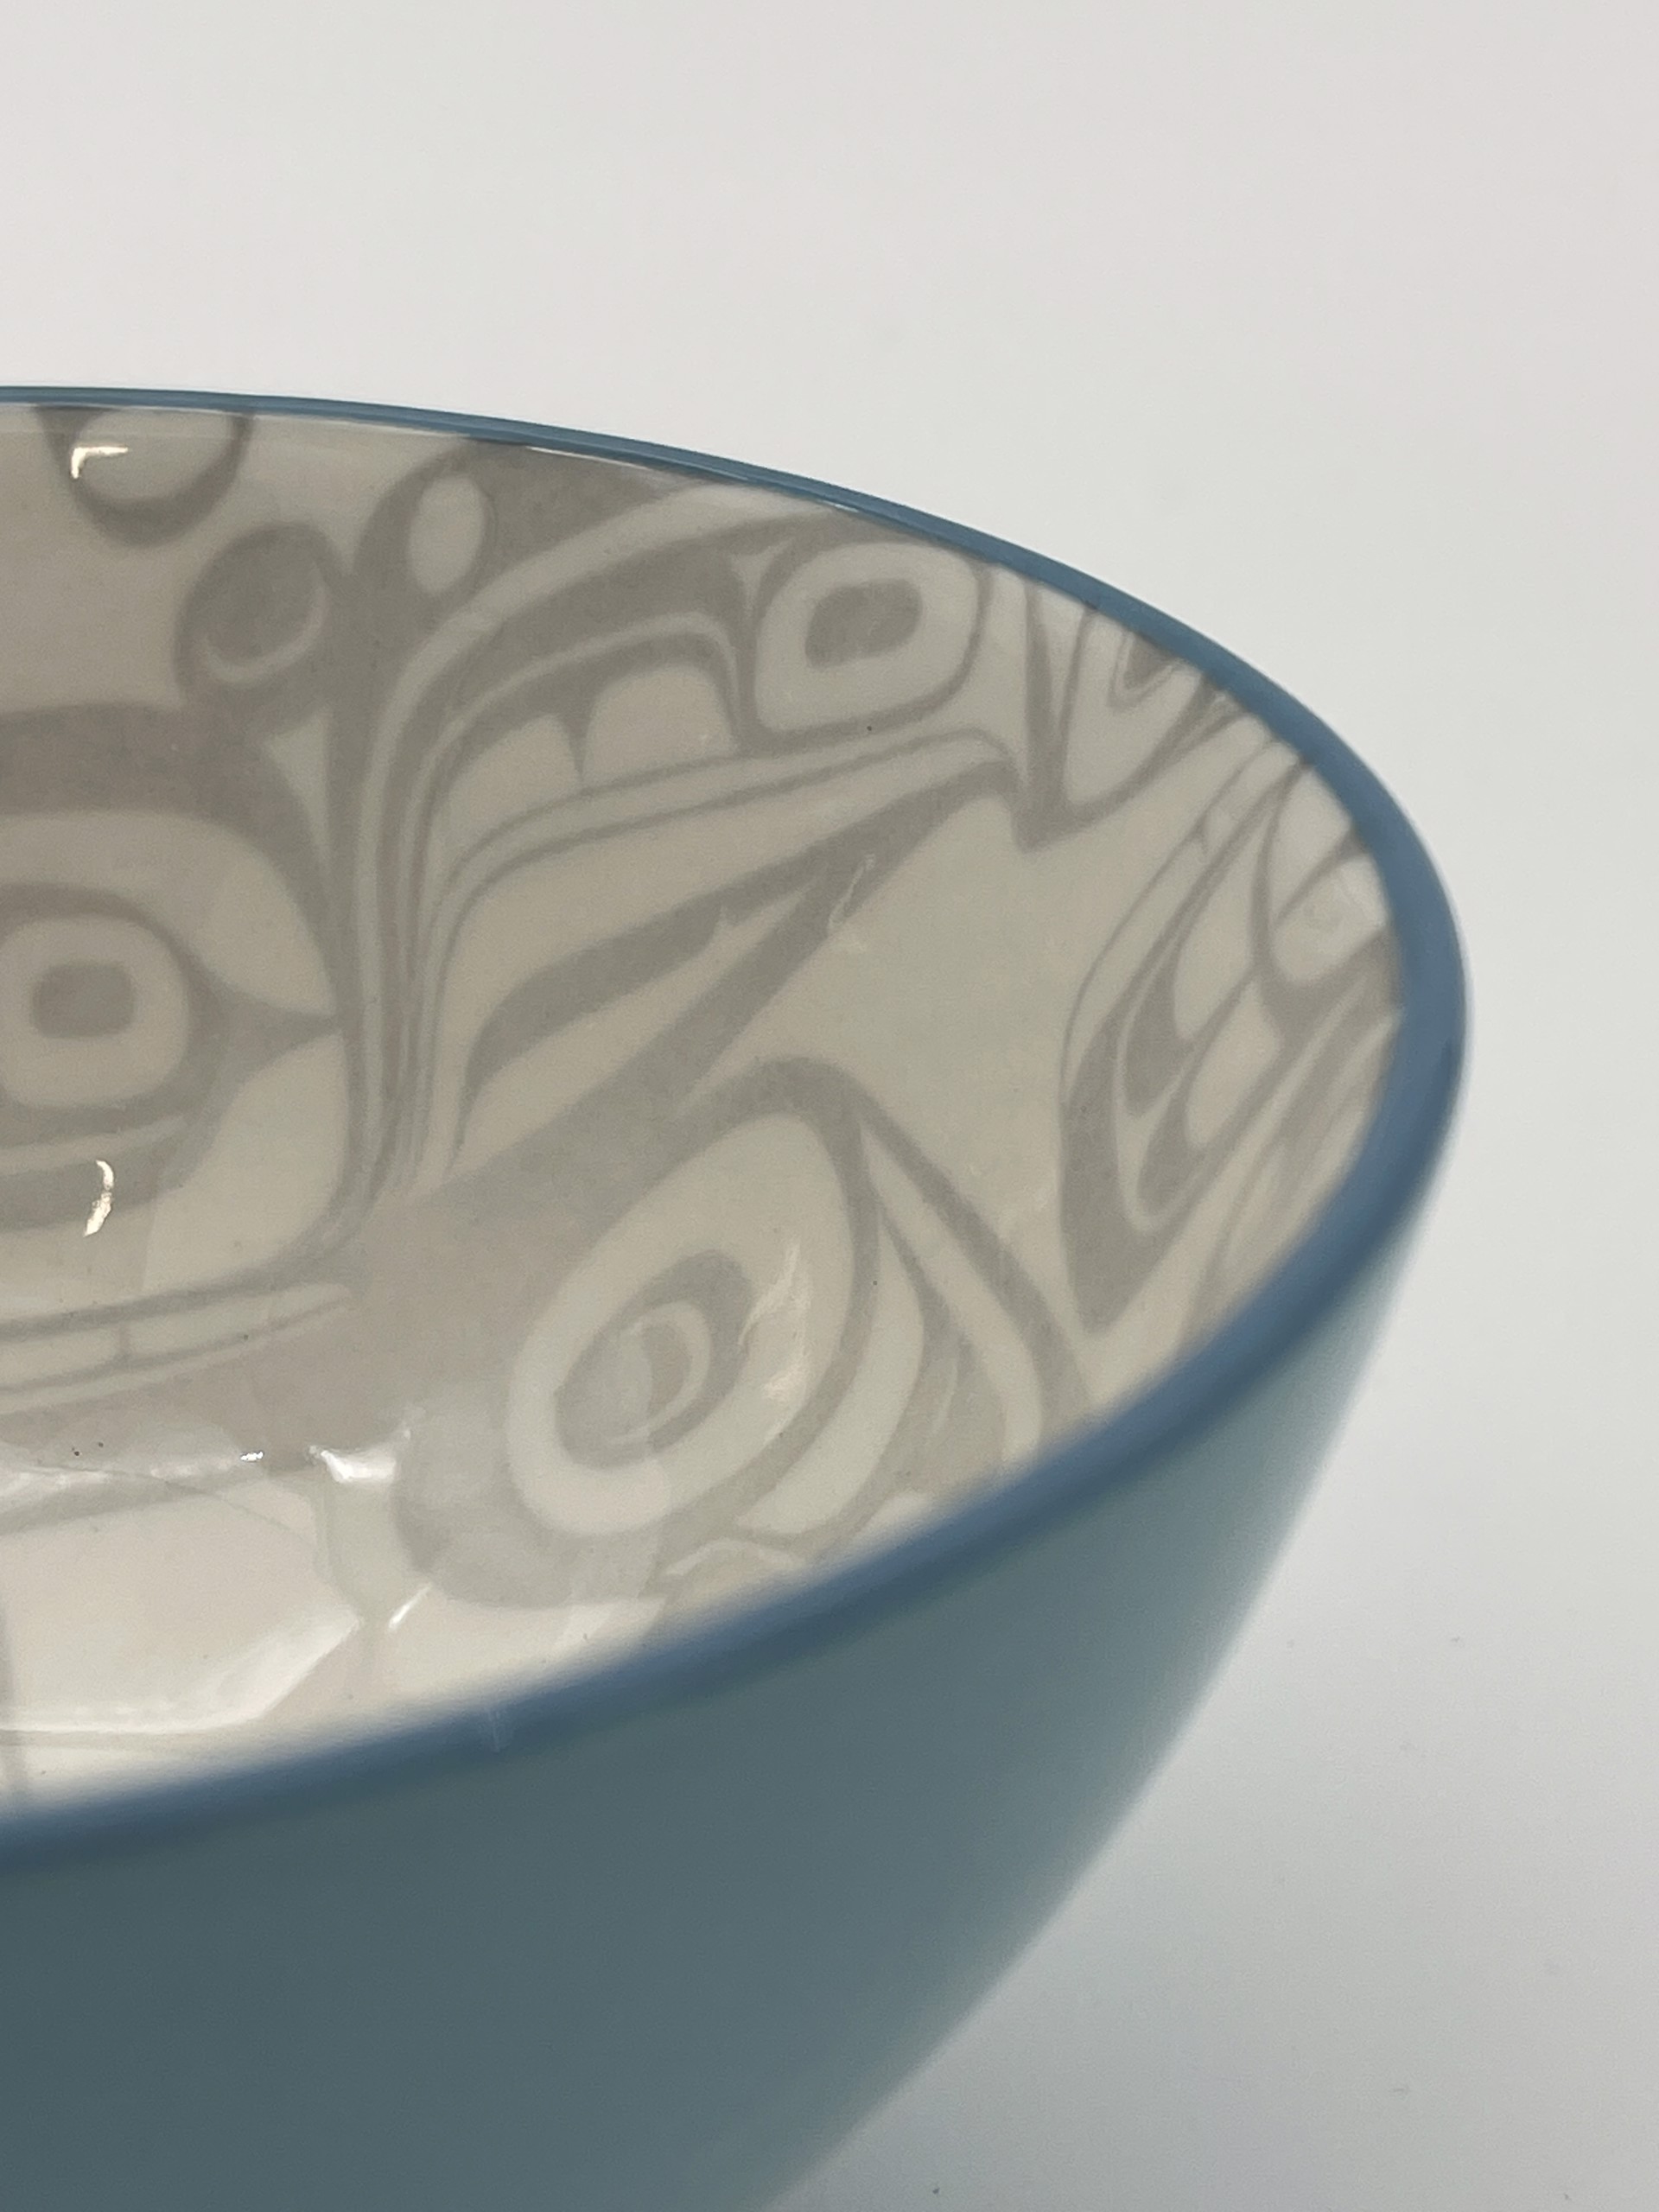 Orca Small Bowl Turquoise/Grey by Kelly Robinson